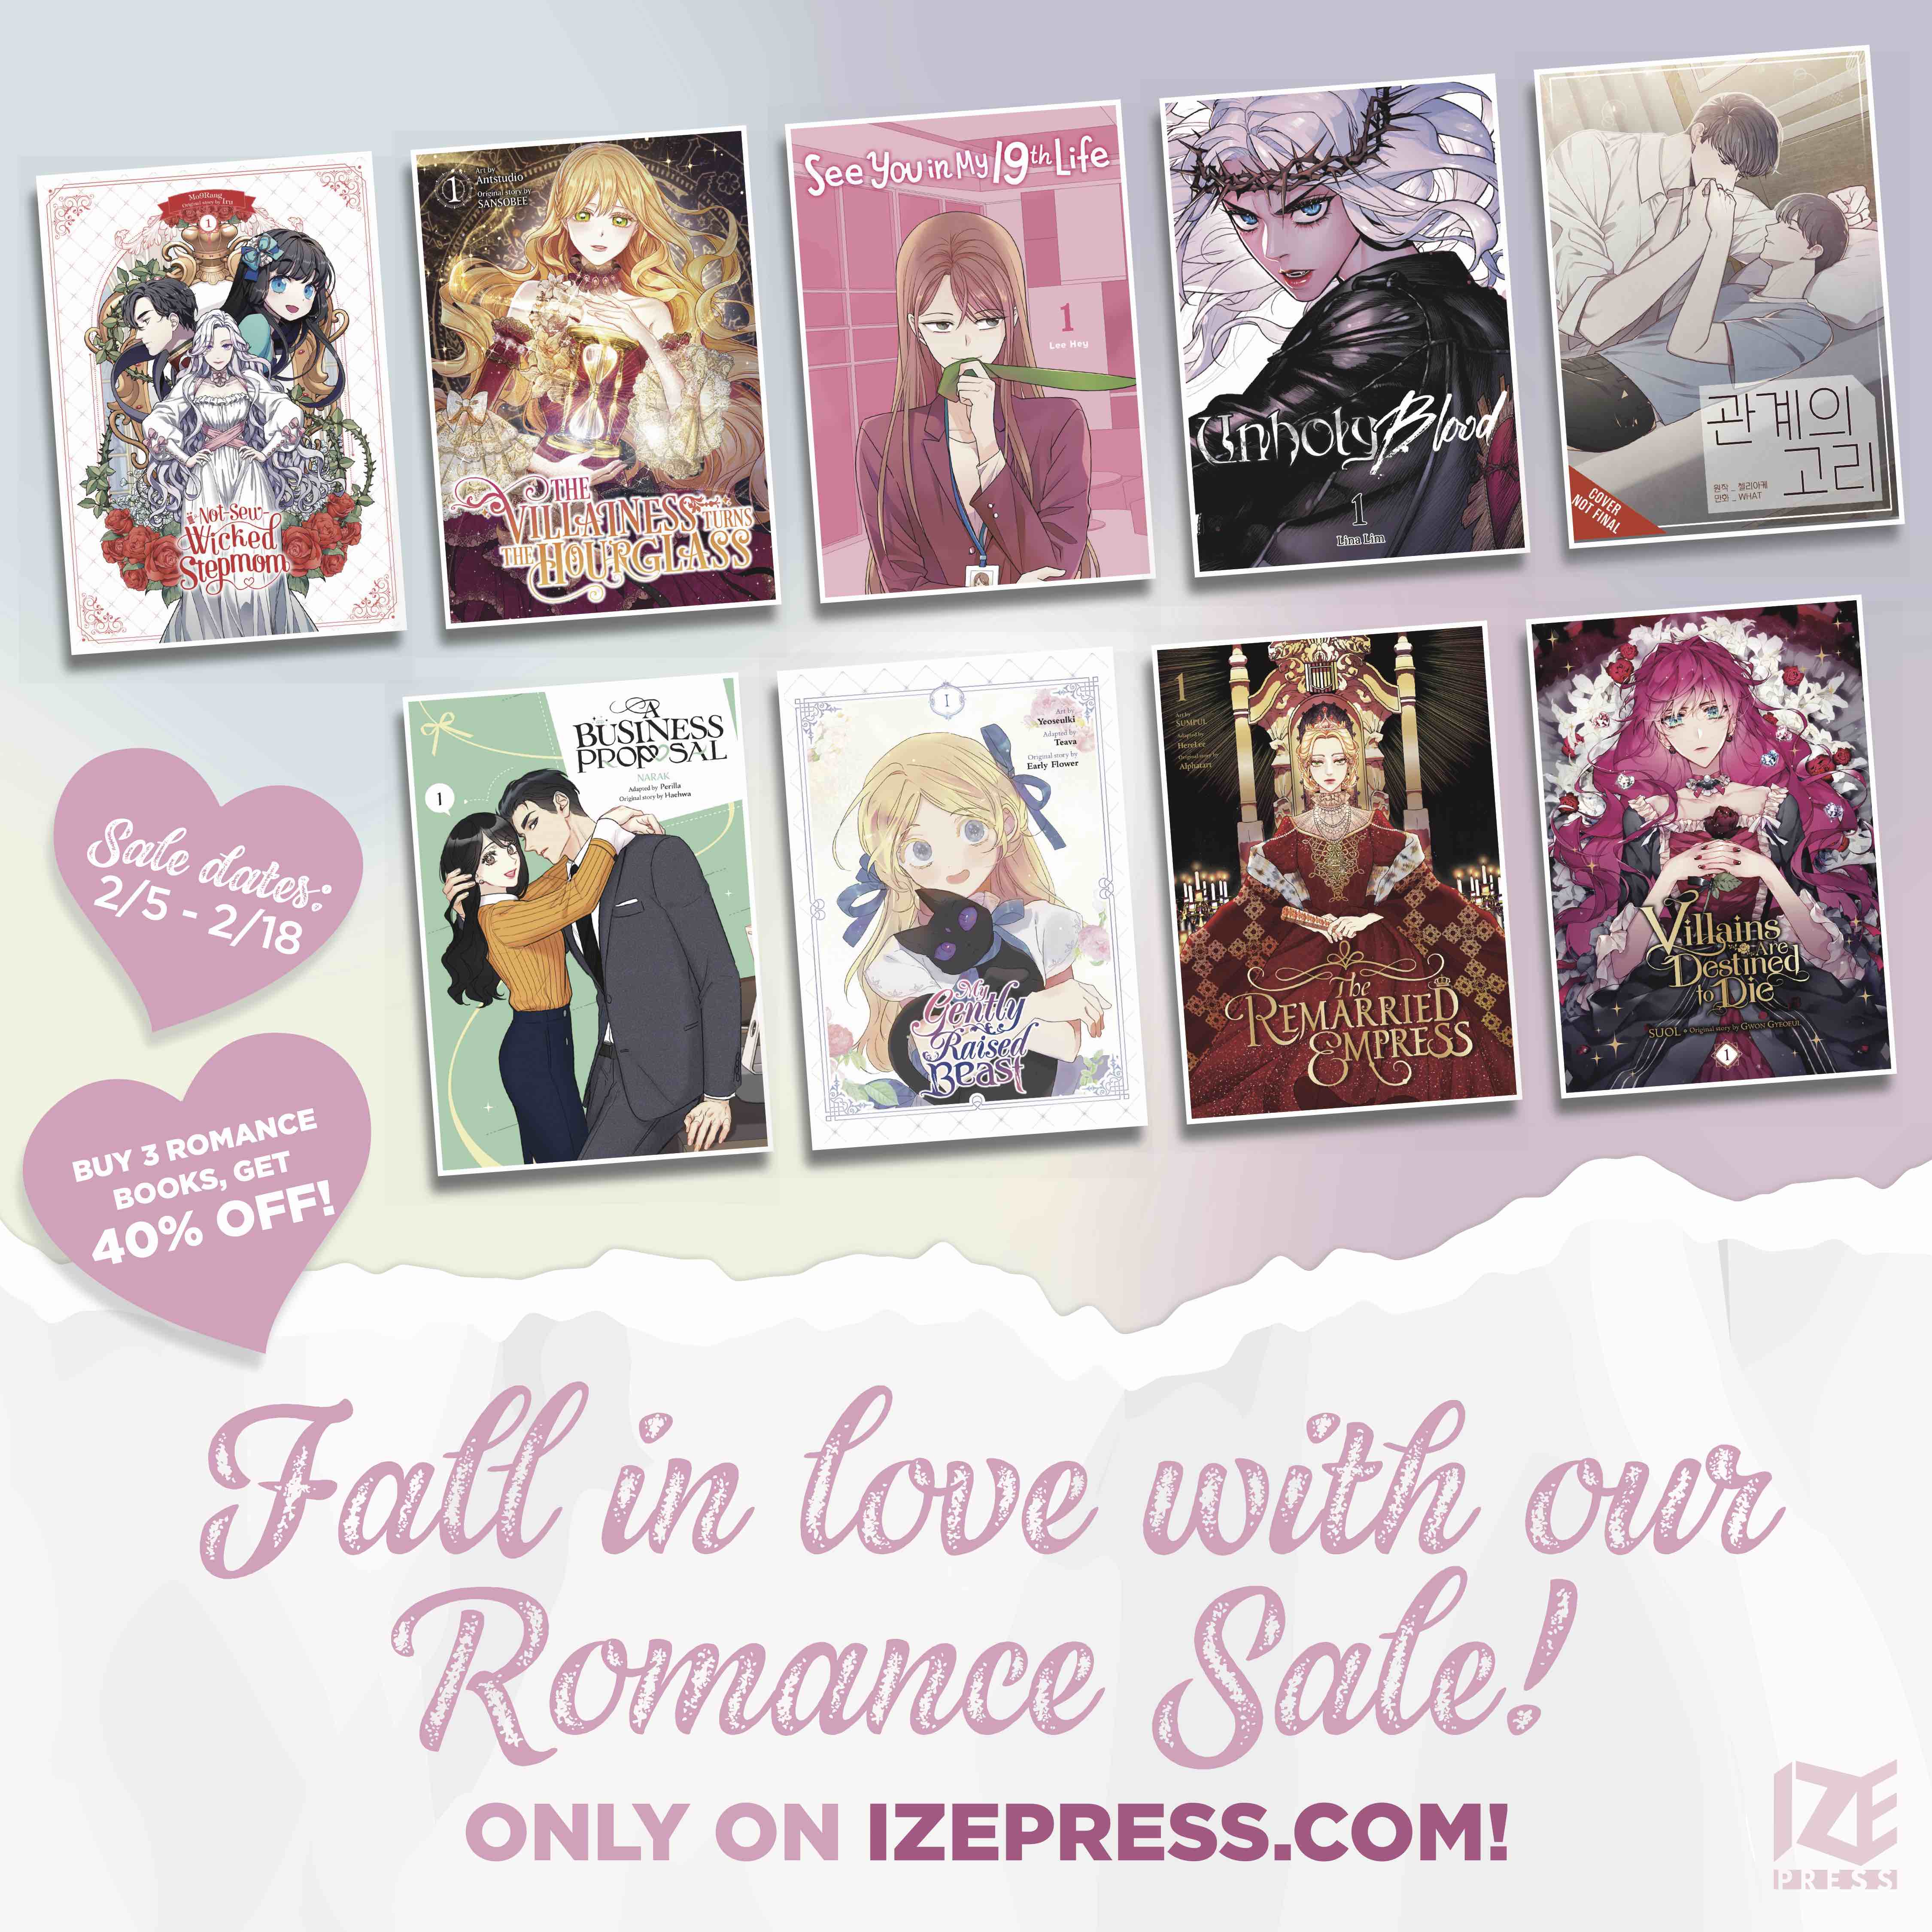 Spread the Love with This Ize Press Romance Sale!